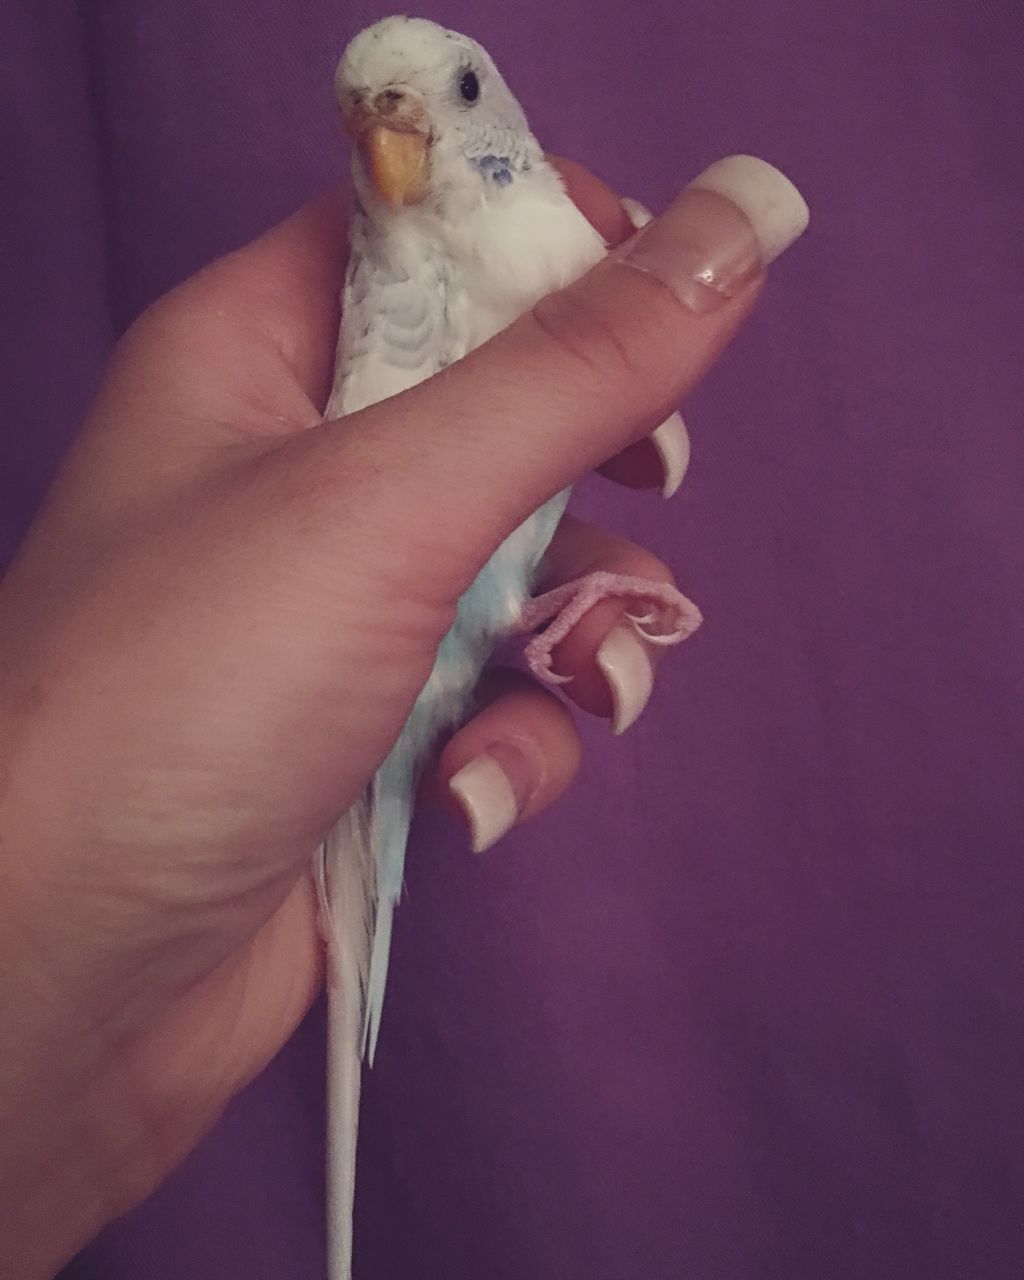 human hand, human body part, bird, one animal, animal themes, one person, budgerigar, pets, indoors, people, close-up, adults only, mammal, day, adult